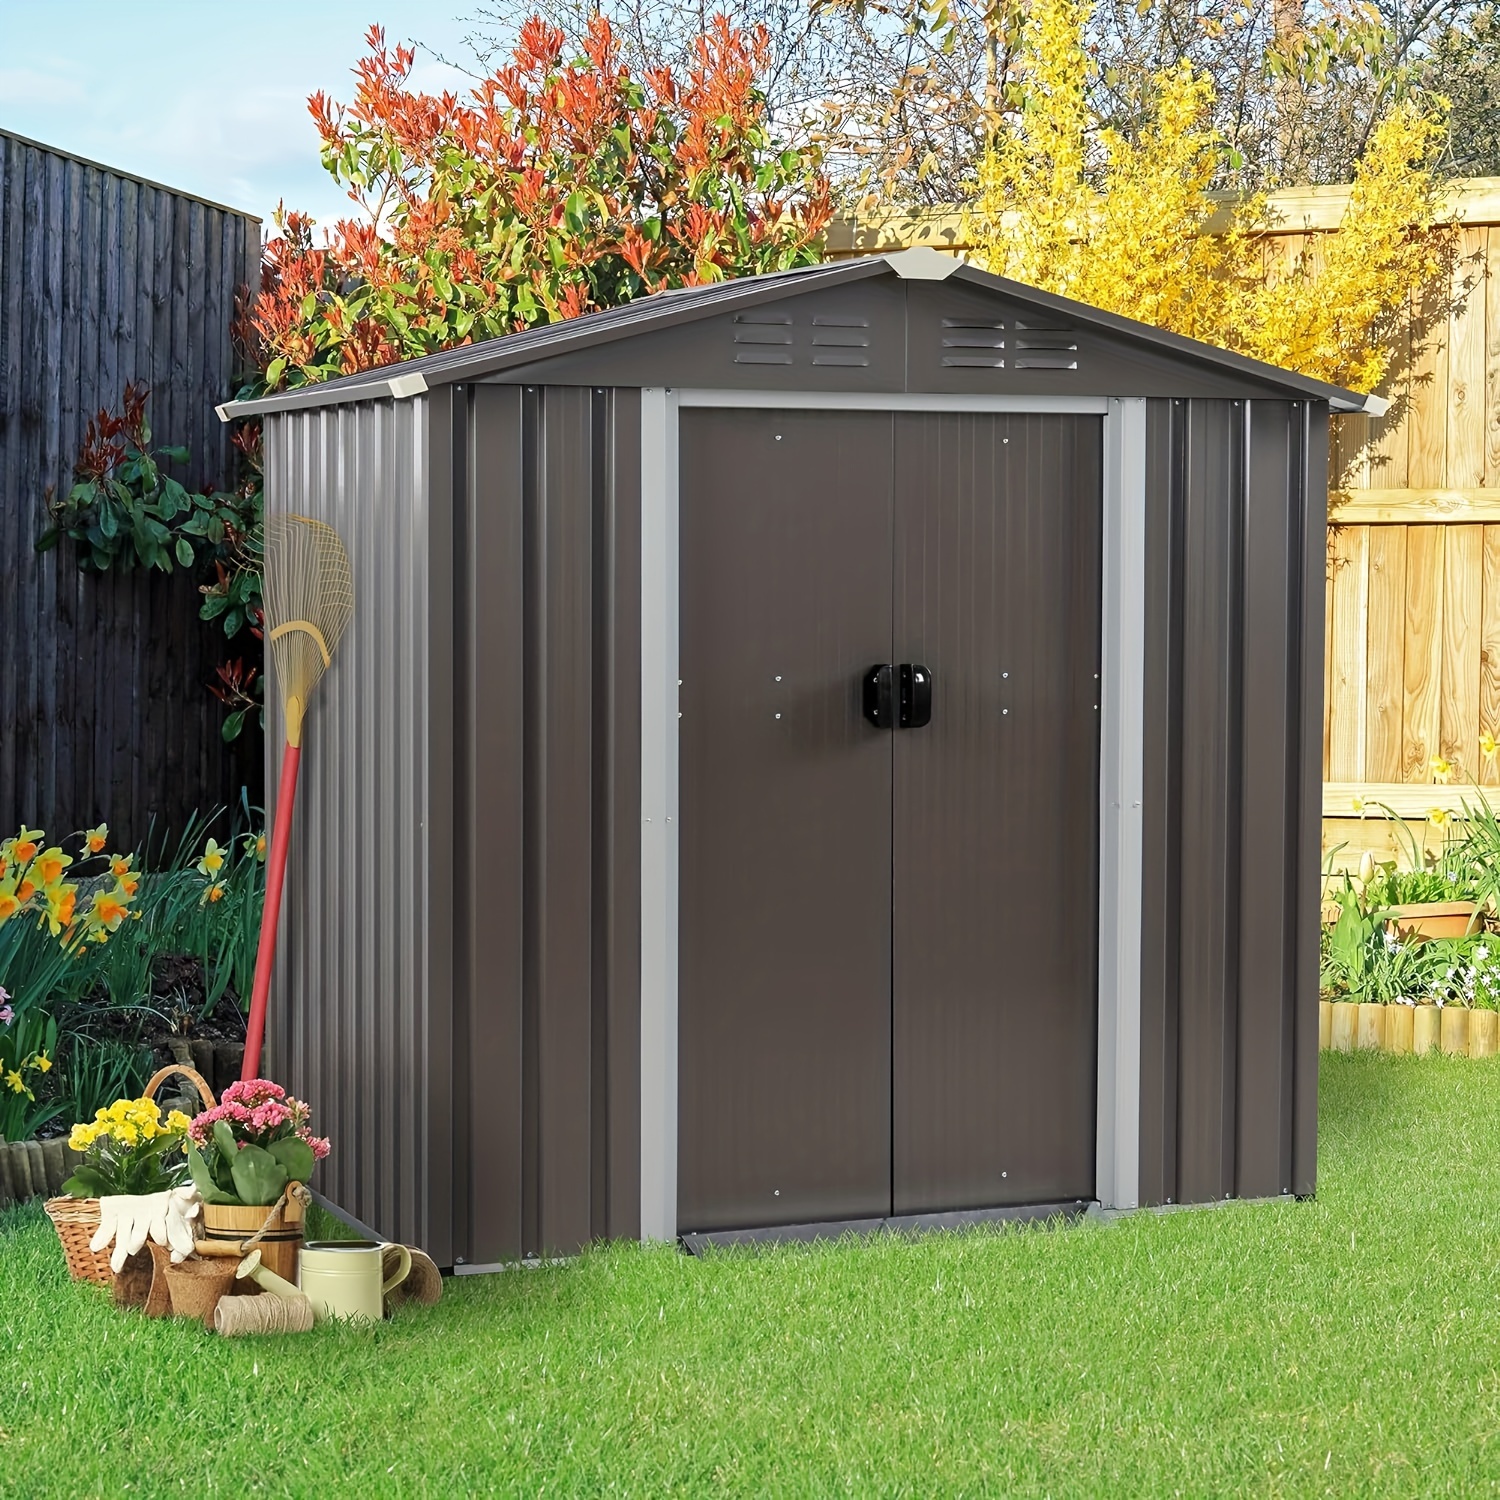 

Jamfly 6 X 4 X 6 Ft Outdoor Storage Shed Clearance With Lockable Door Metal Garden Shed Steel Anti-corrosion Storage House Waterproof Tool Shed For Backyard Patio, Lawn And Garden (gray)